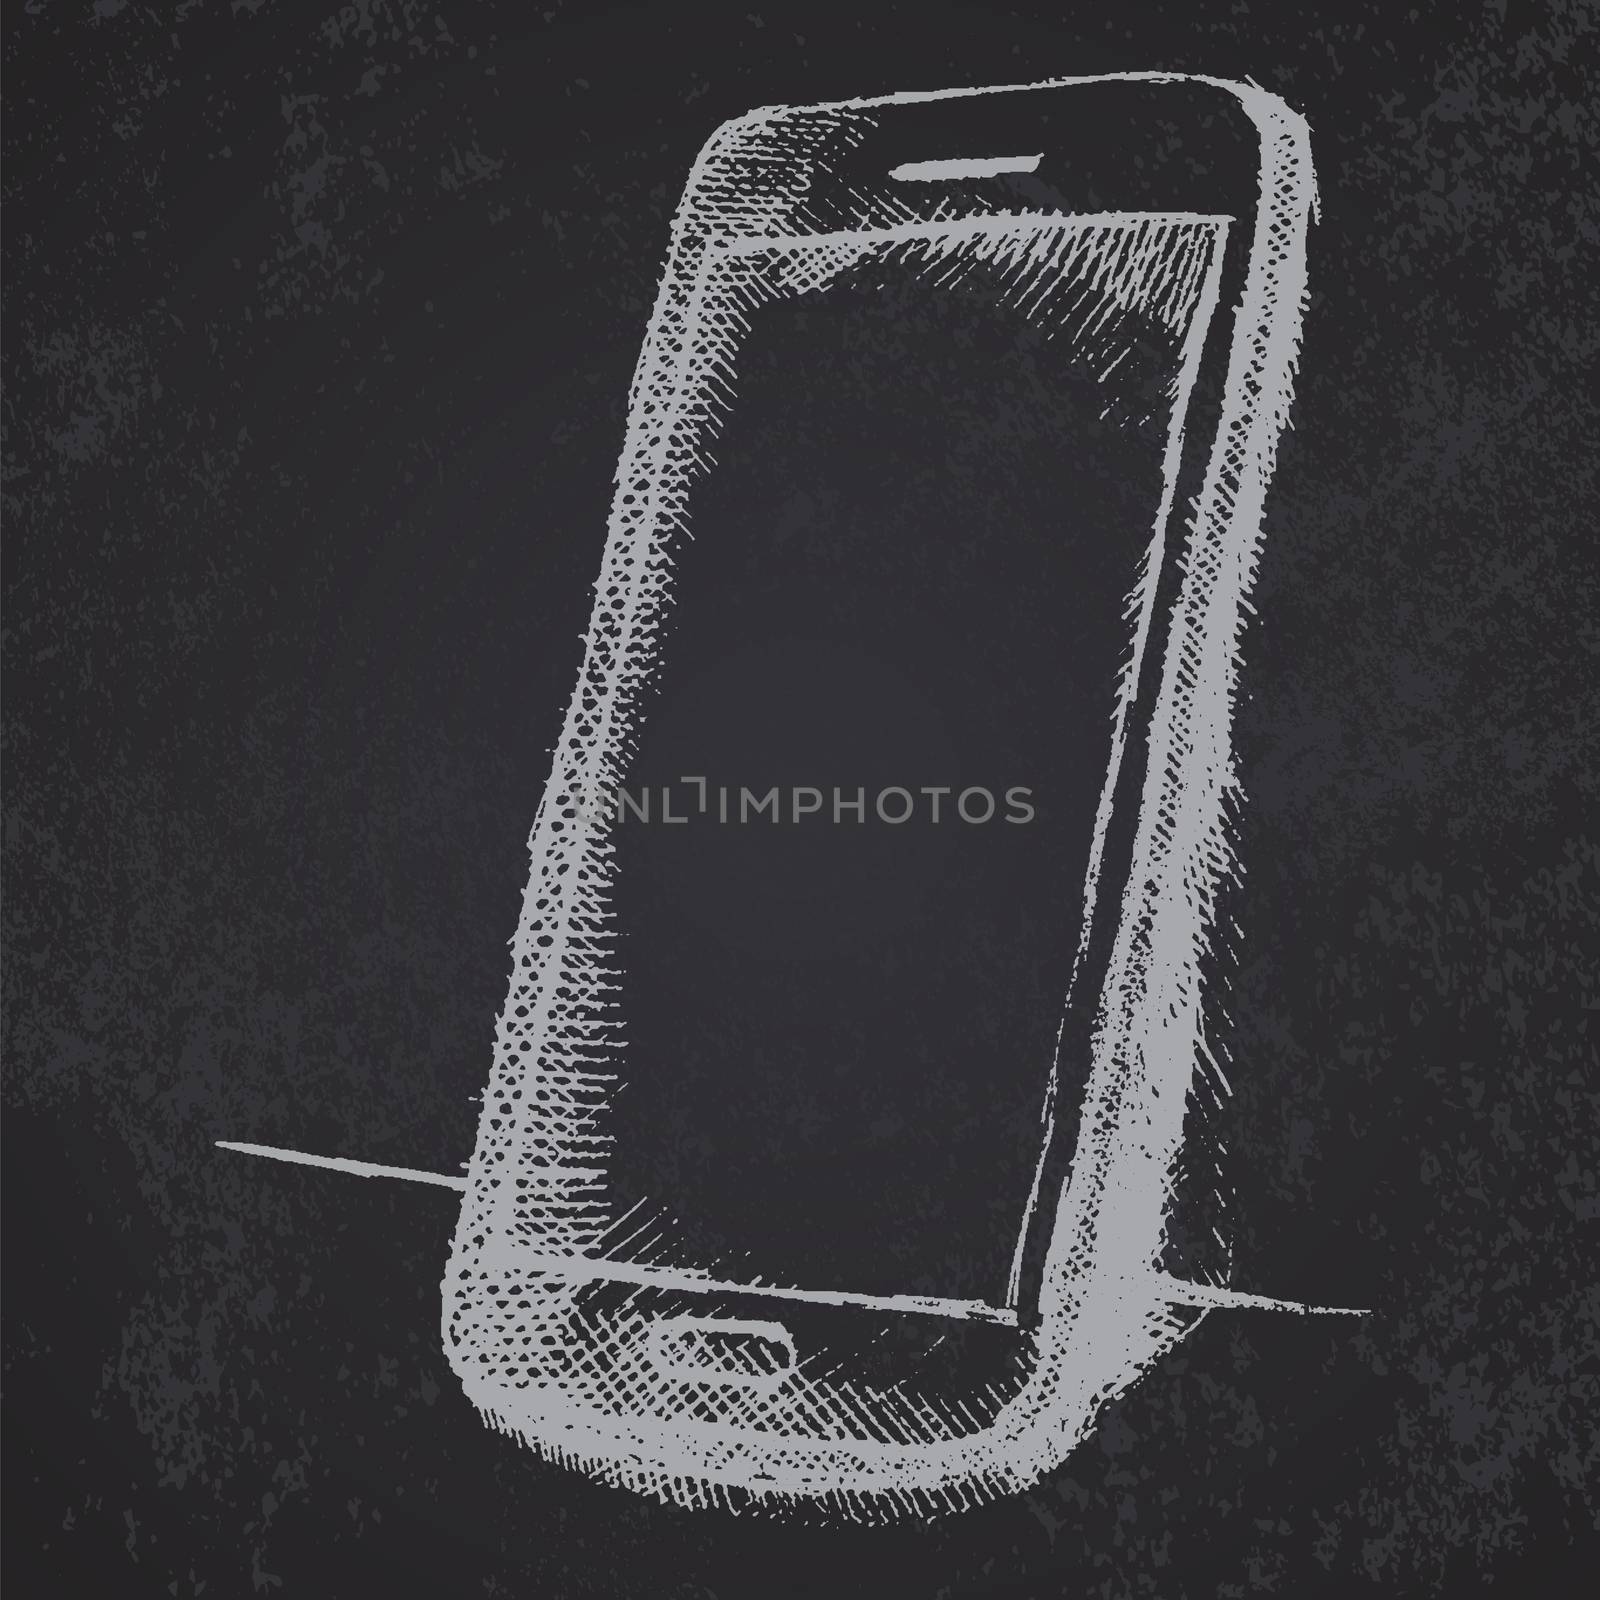 Handdrawn sketch of mobile phone with shadow on blackboard.